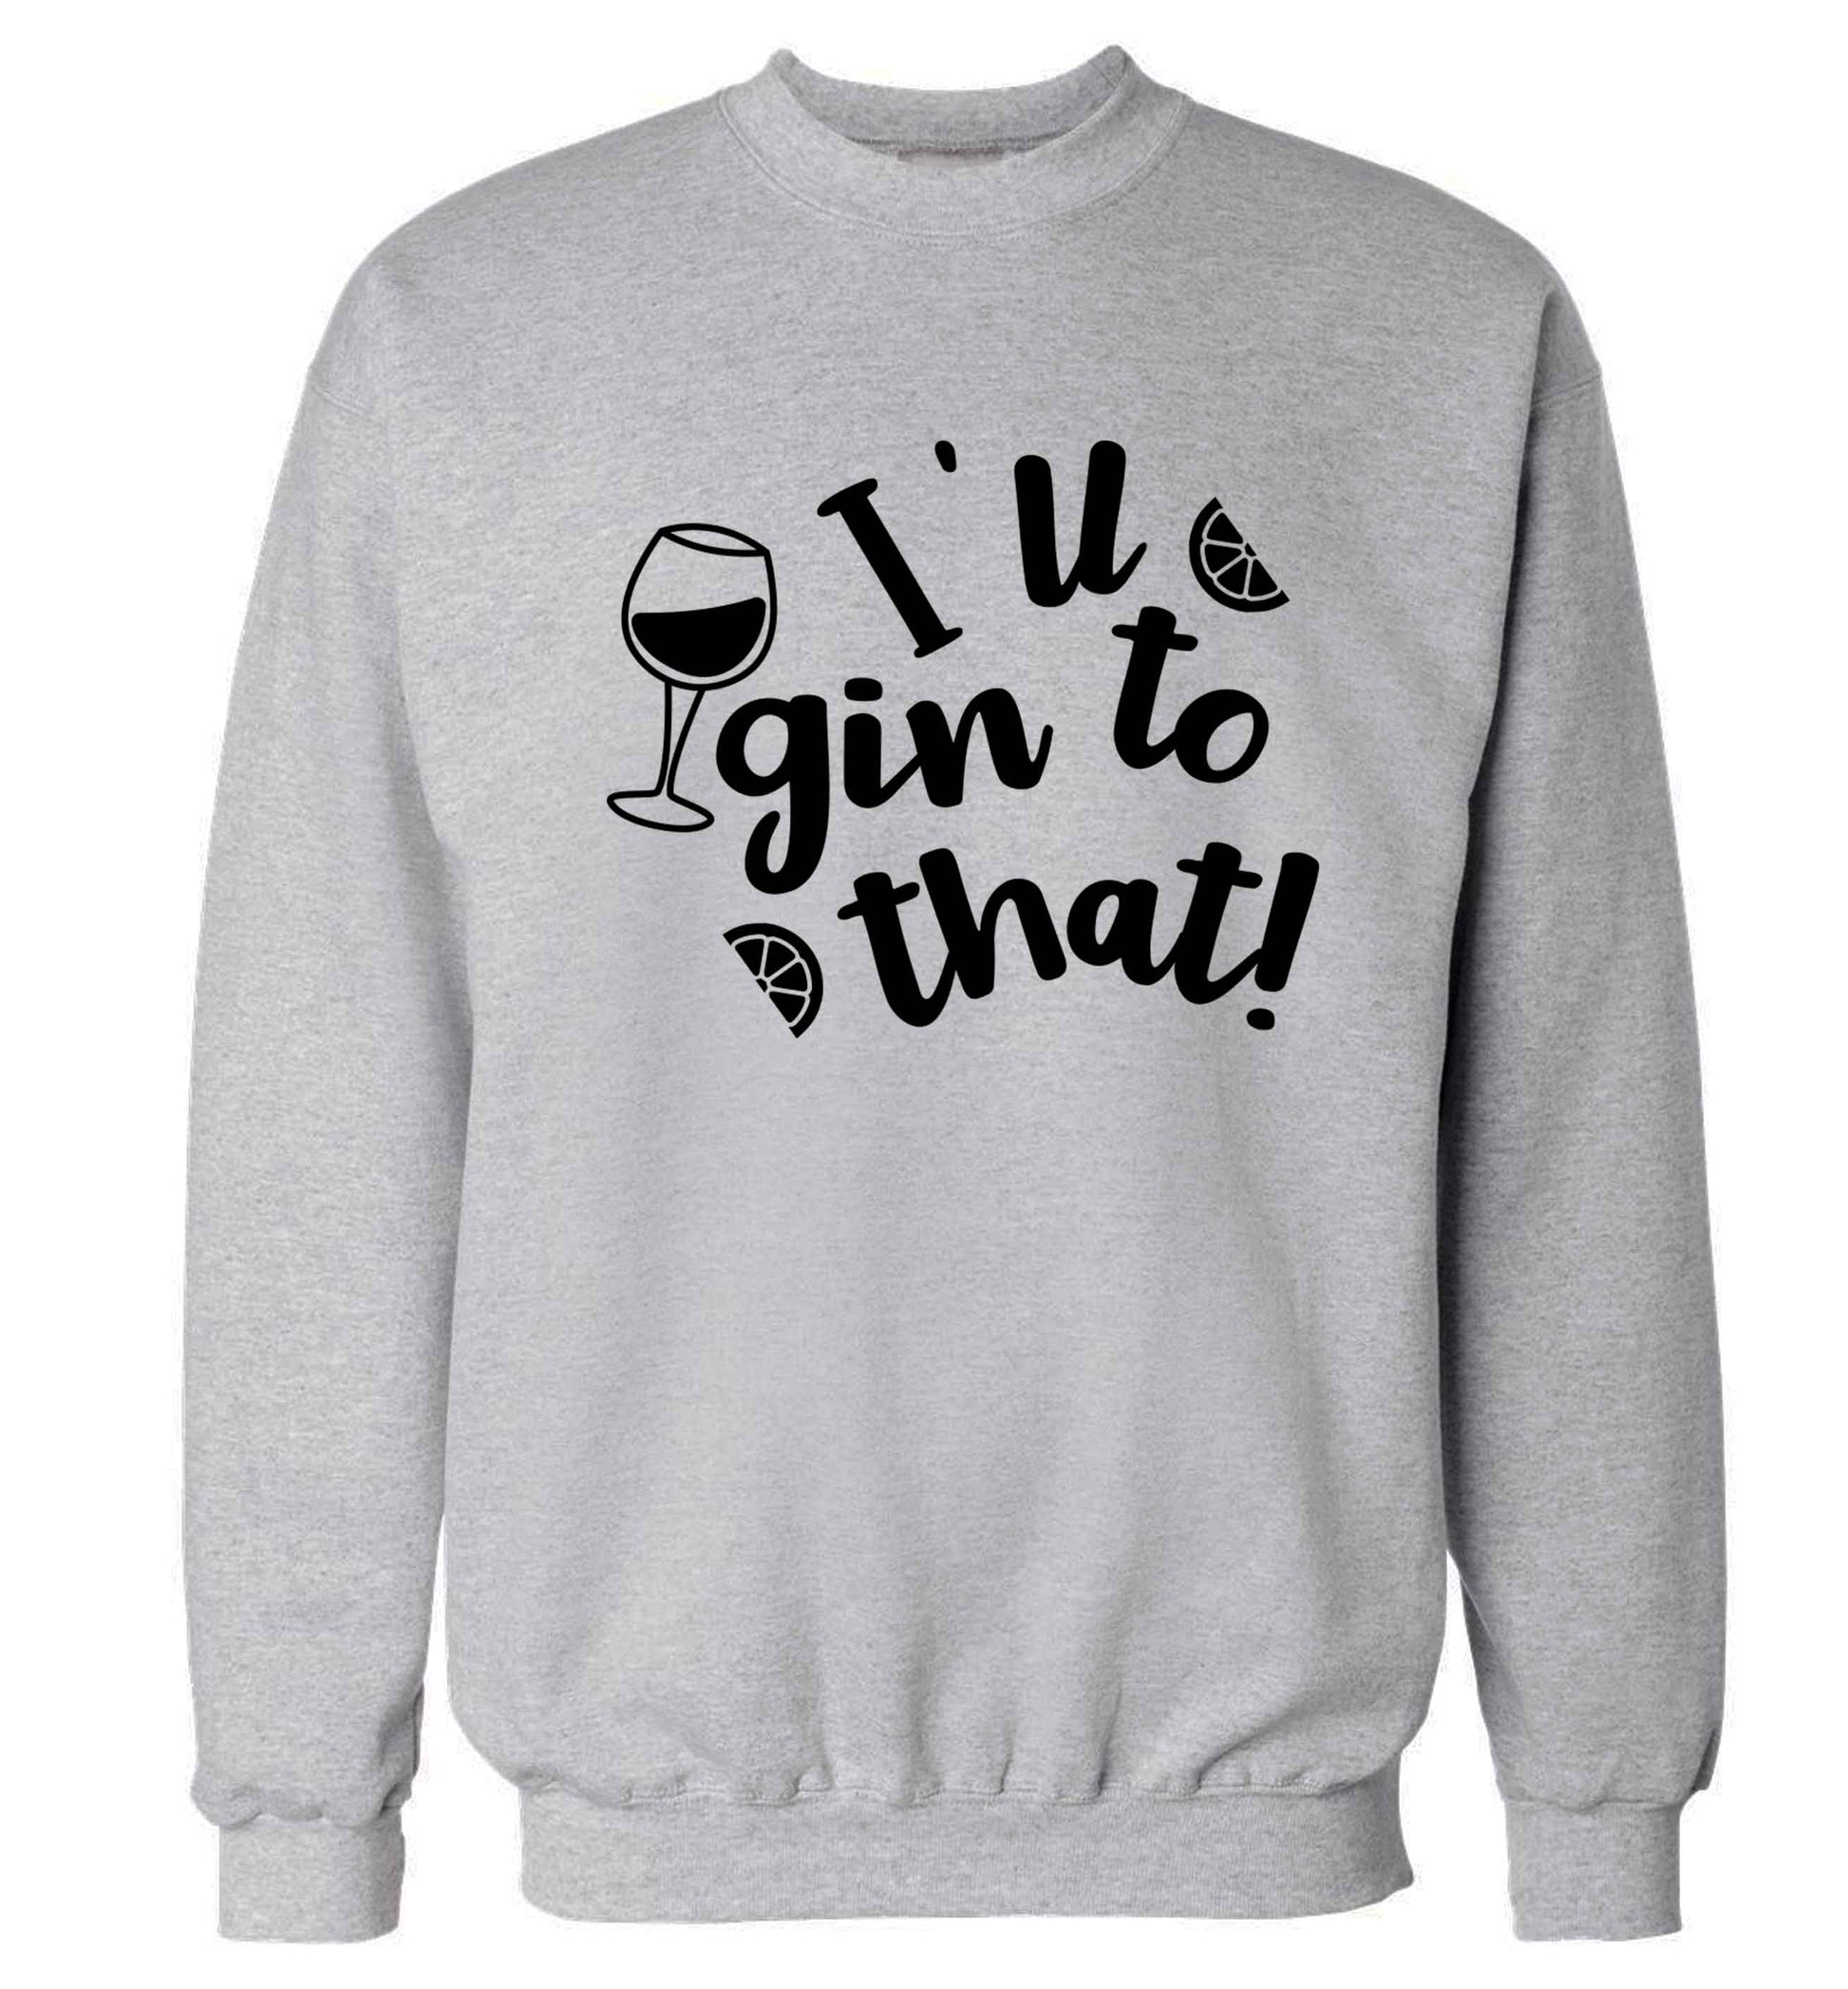 I'll gin to that! Adult's unisex grey Sweater 2XL